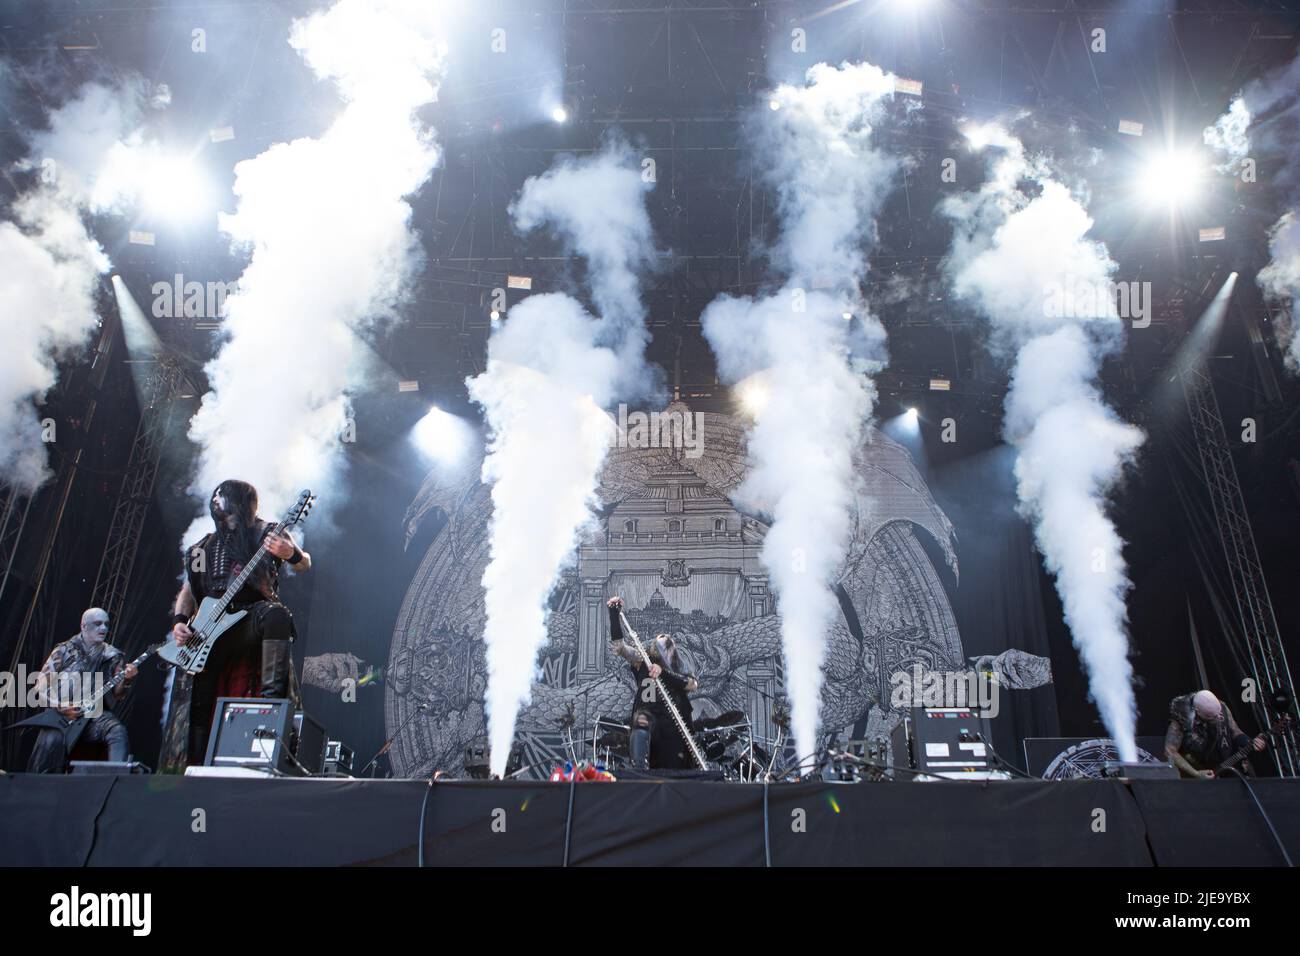 Oslo, Norway. 24th, June 2022. The Norwegian symphonic black metal band Dimmu Borgir performs a live concert during the Norwegian music festival Tons of Rock 2022 in Oslo.  (Photo credit: Gonzales Photo - Per-Otto Oppi). Stock Photo